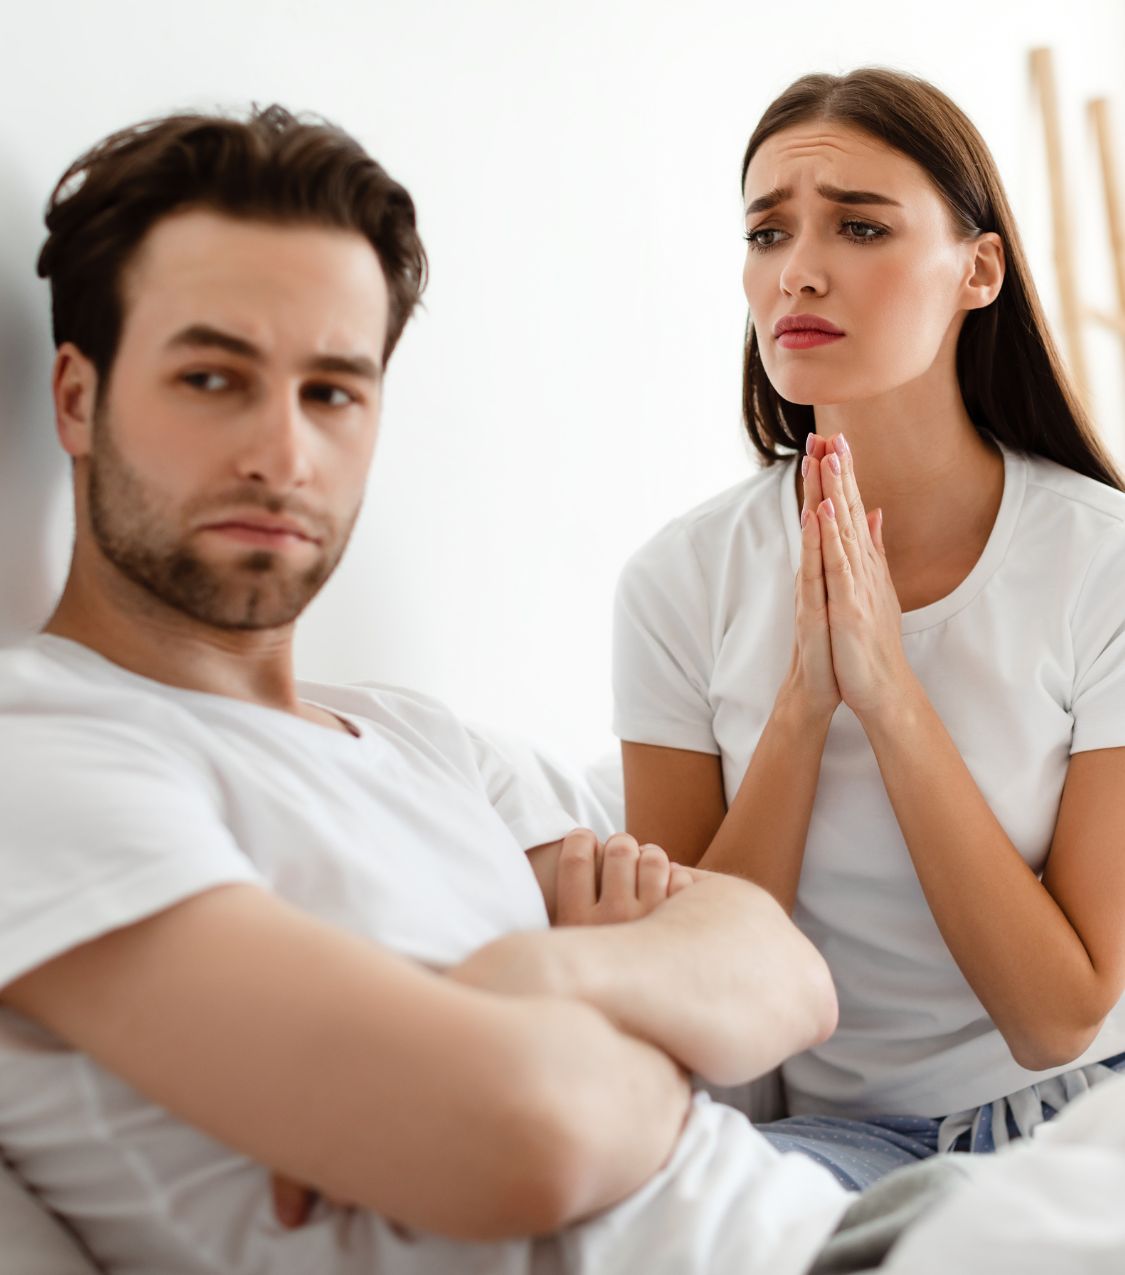 A man looking away from a woman making a begging gesture. Trust after infidelity is crucial for healing after cheating. Contact Relationship Experts for guidance in the US, Colorado, Canada, Australia, the UK, and globally.